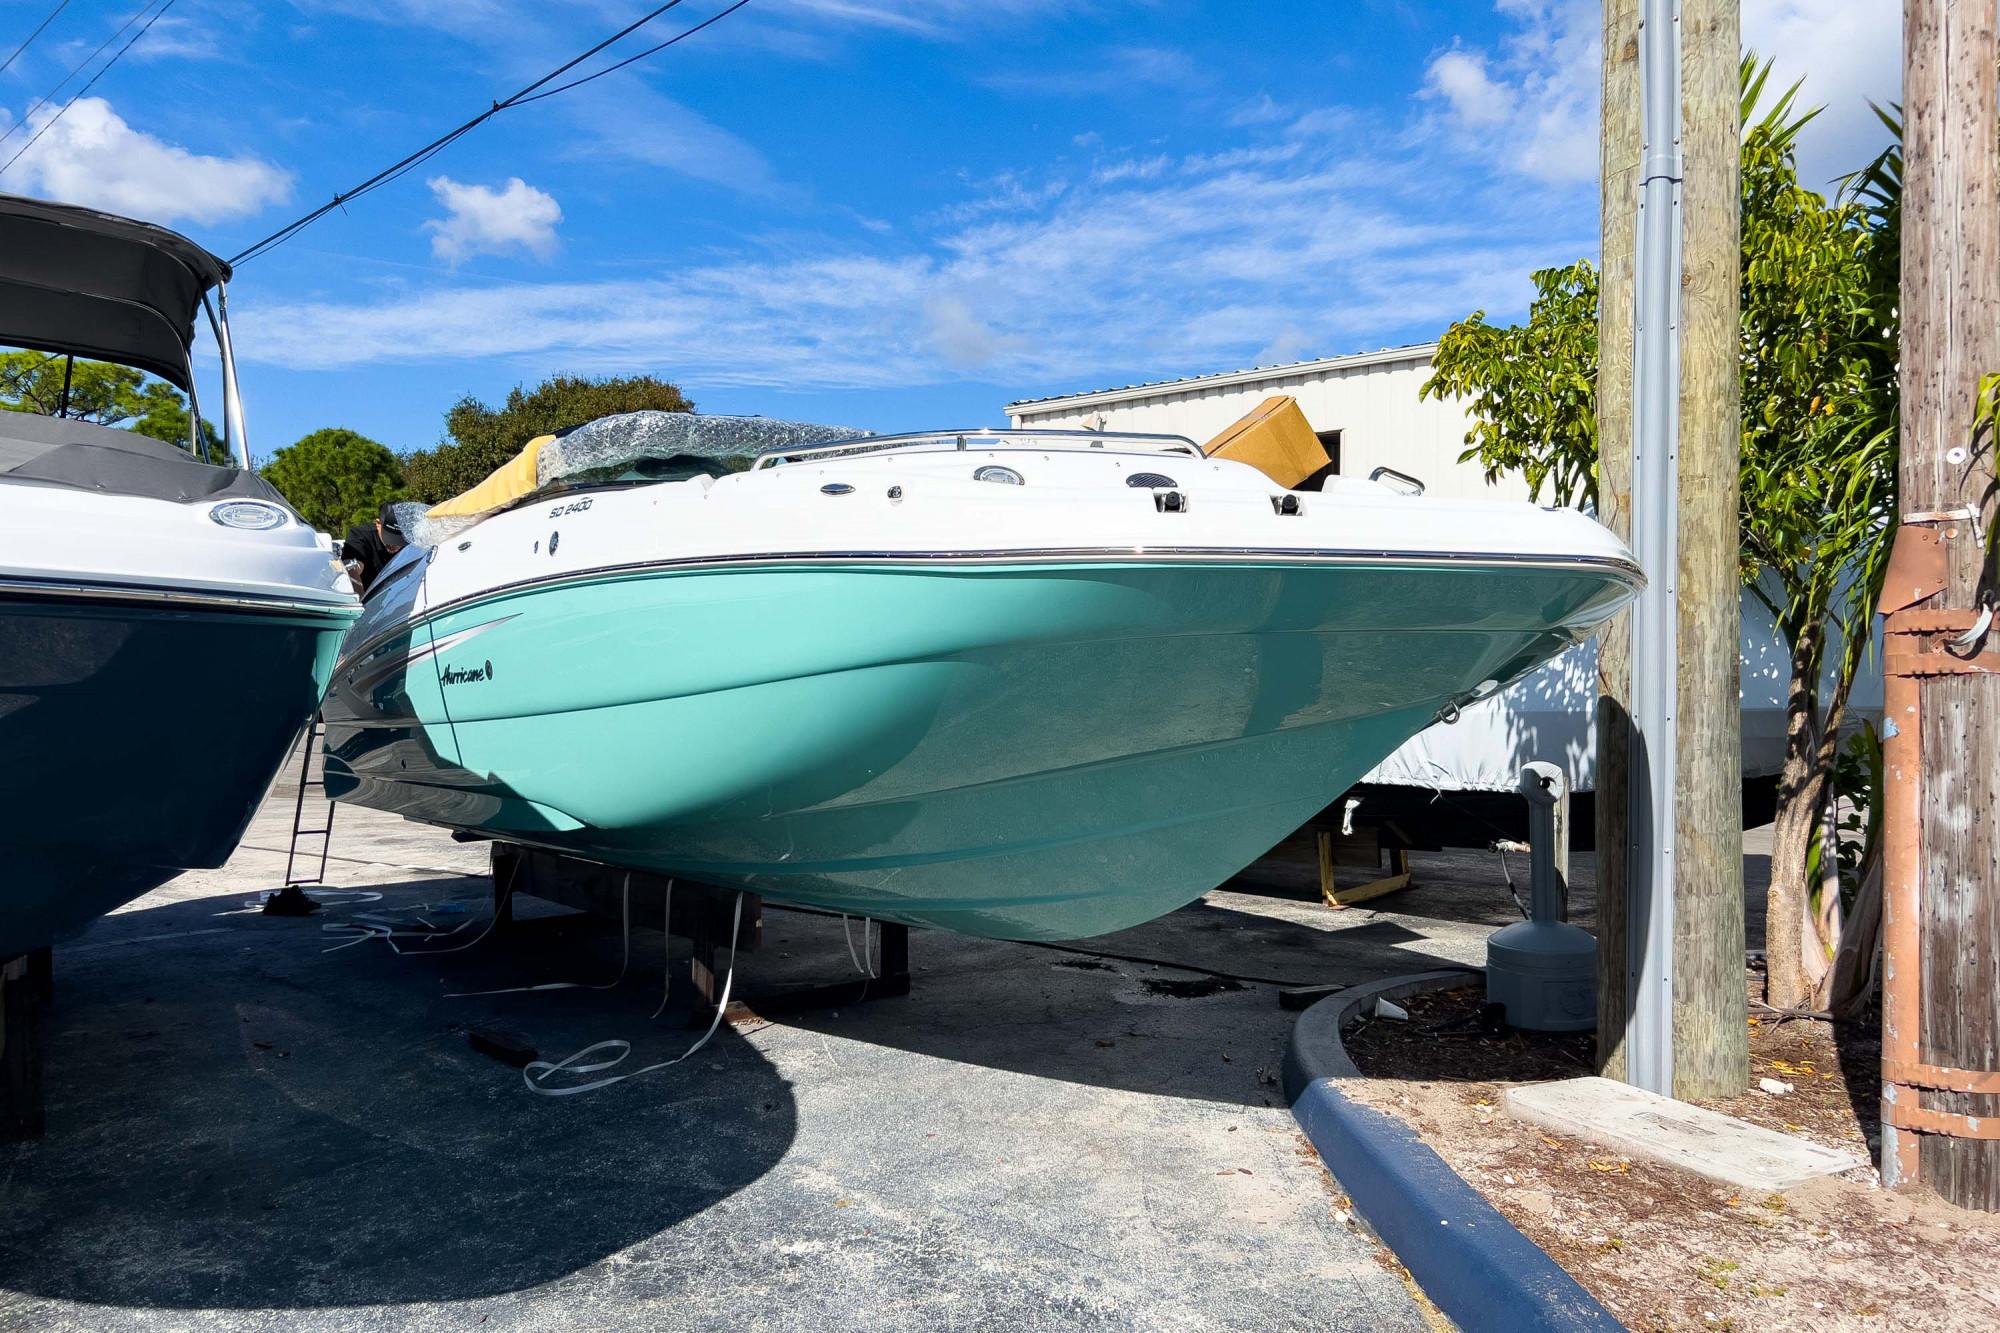 Page 5 of 32 - Hurricane boats for sale in Florida - boats.com